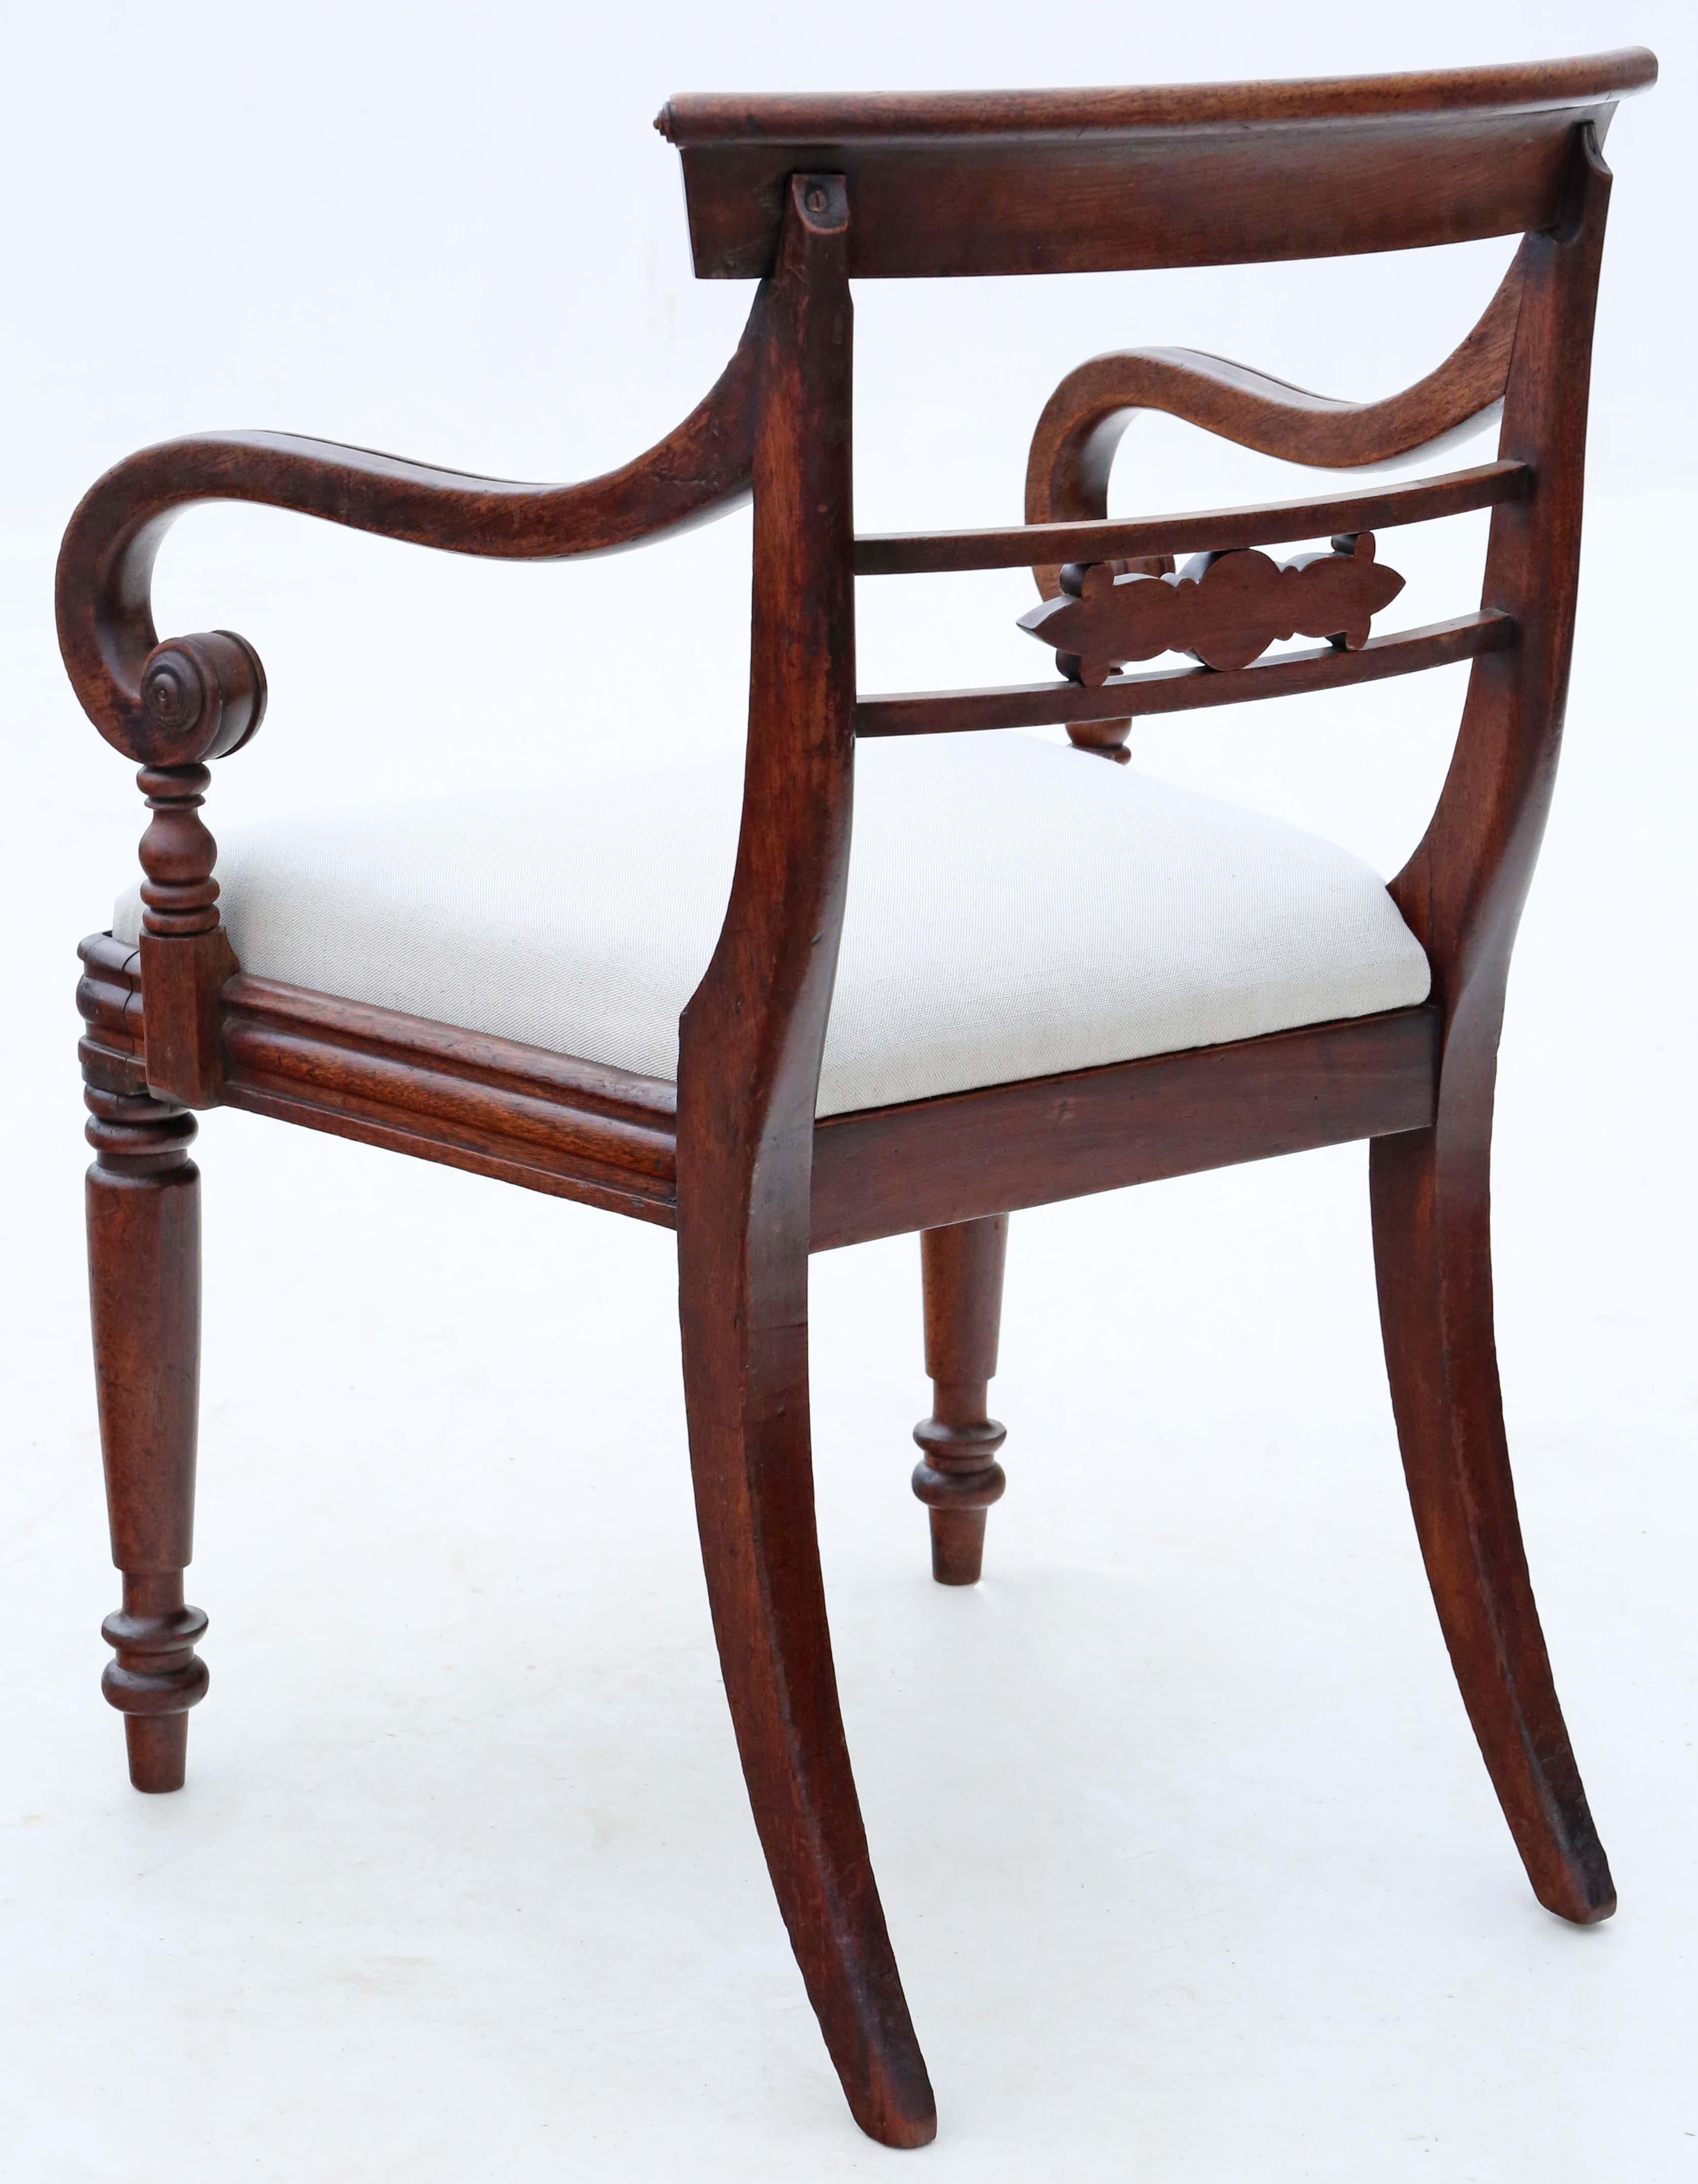 Wood Antique Fine Quality 19th Century Mahogany Elbow, Carver or Desk Chair